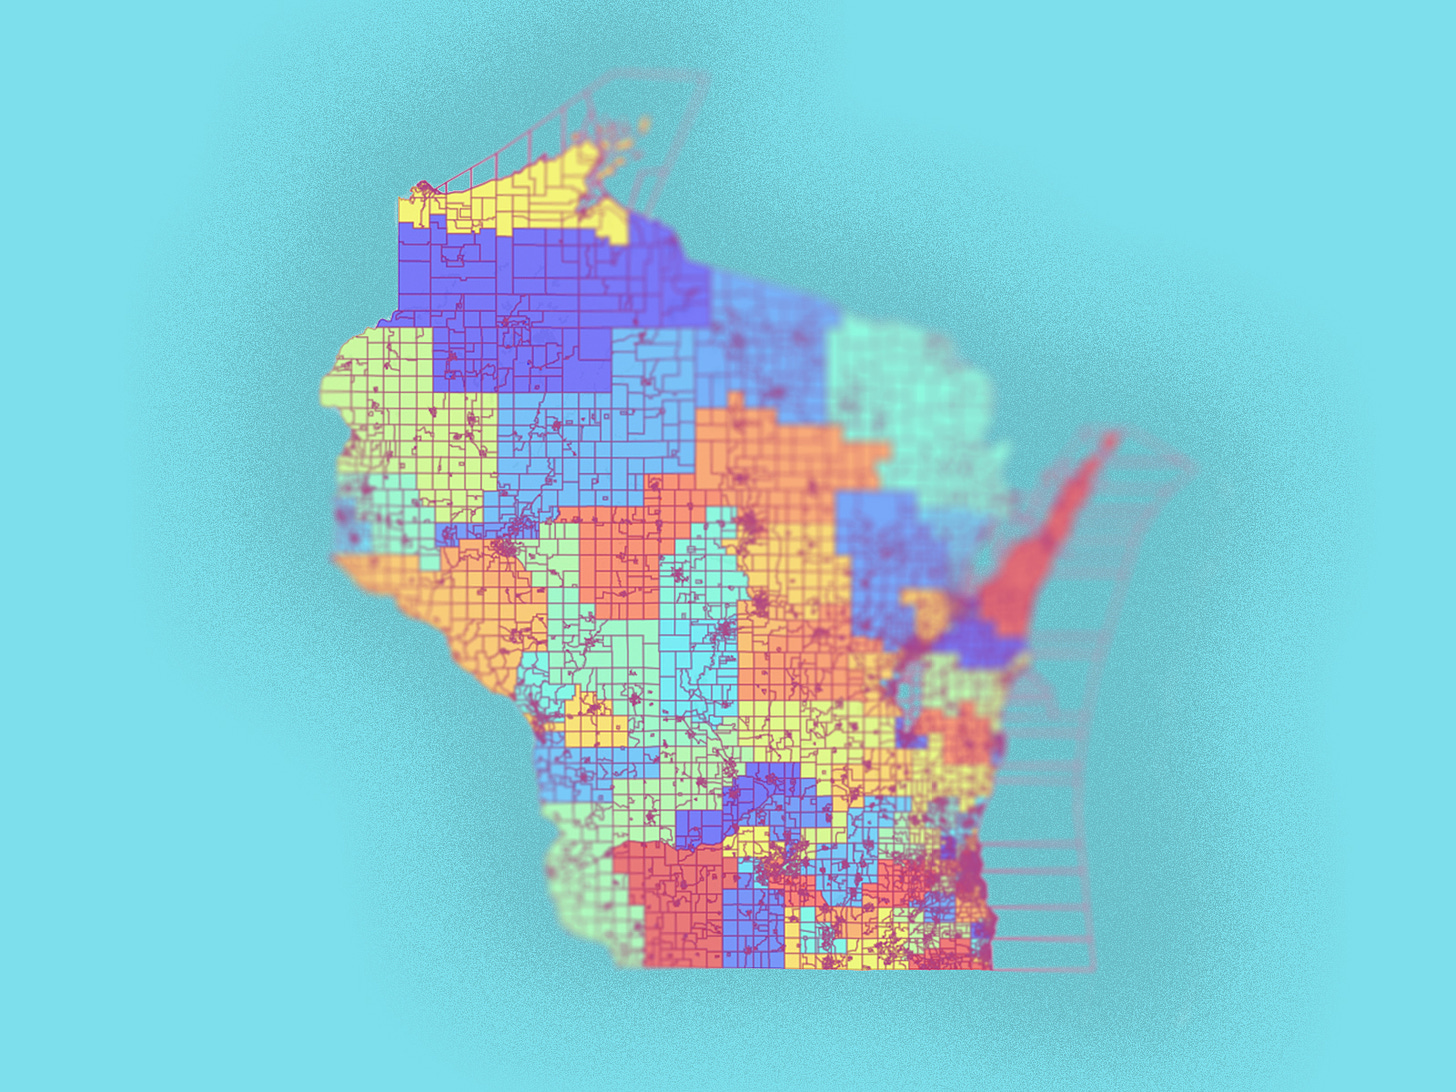 A multicolored map of newly drawn Wisconsin Assembly districts is shown over a blue background. The map is blurred and indistinct in parts, clearer in others, suggesting that some parts of the state are still coming into focus for the viewer.